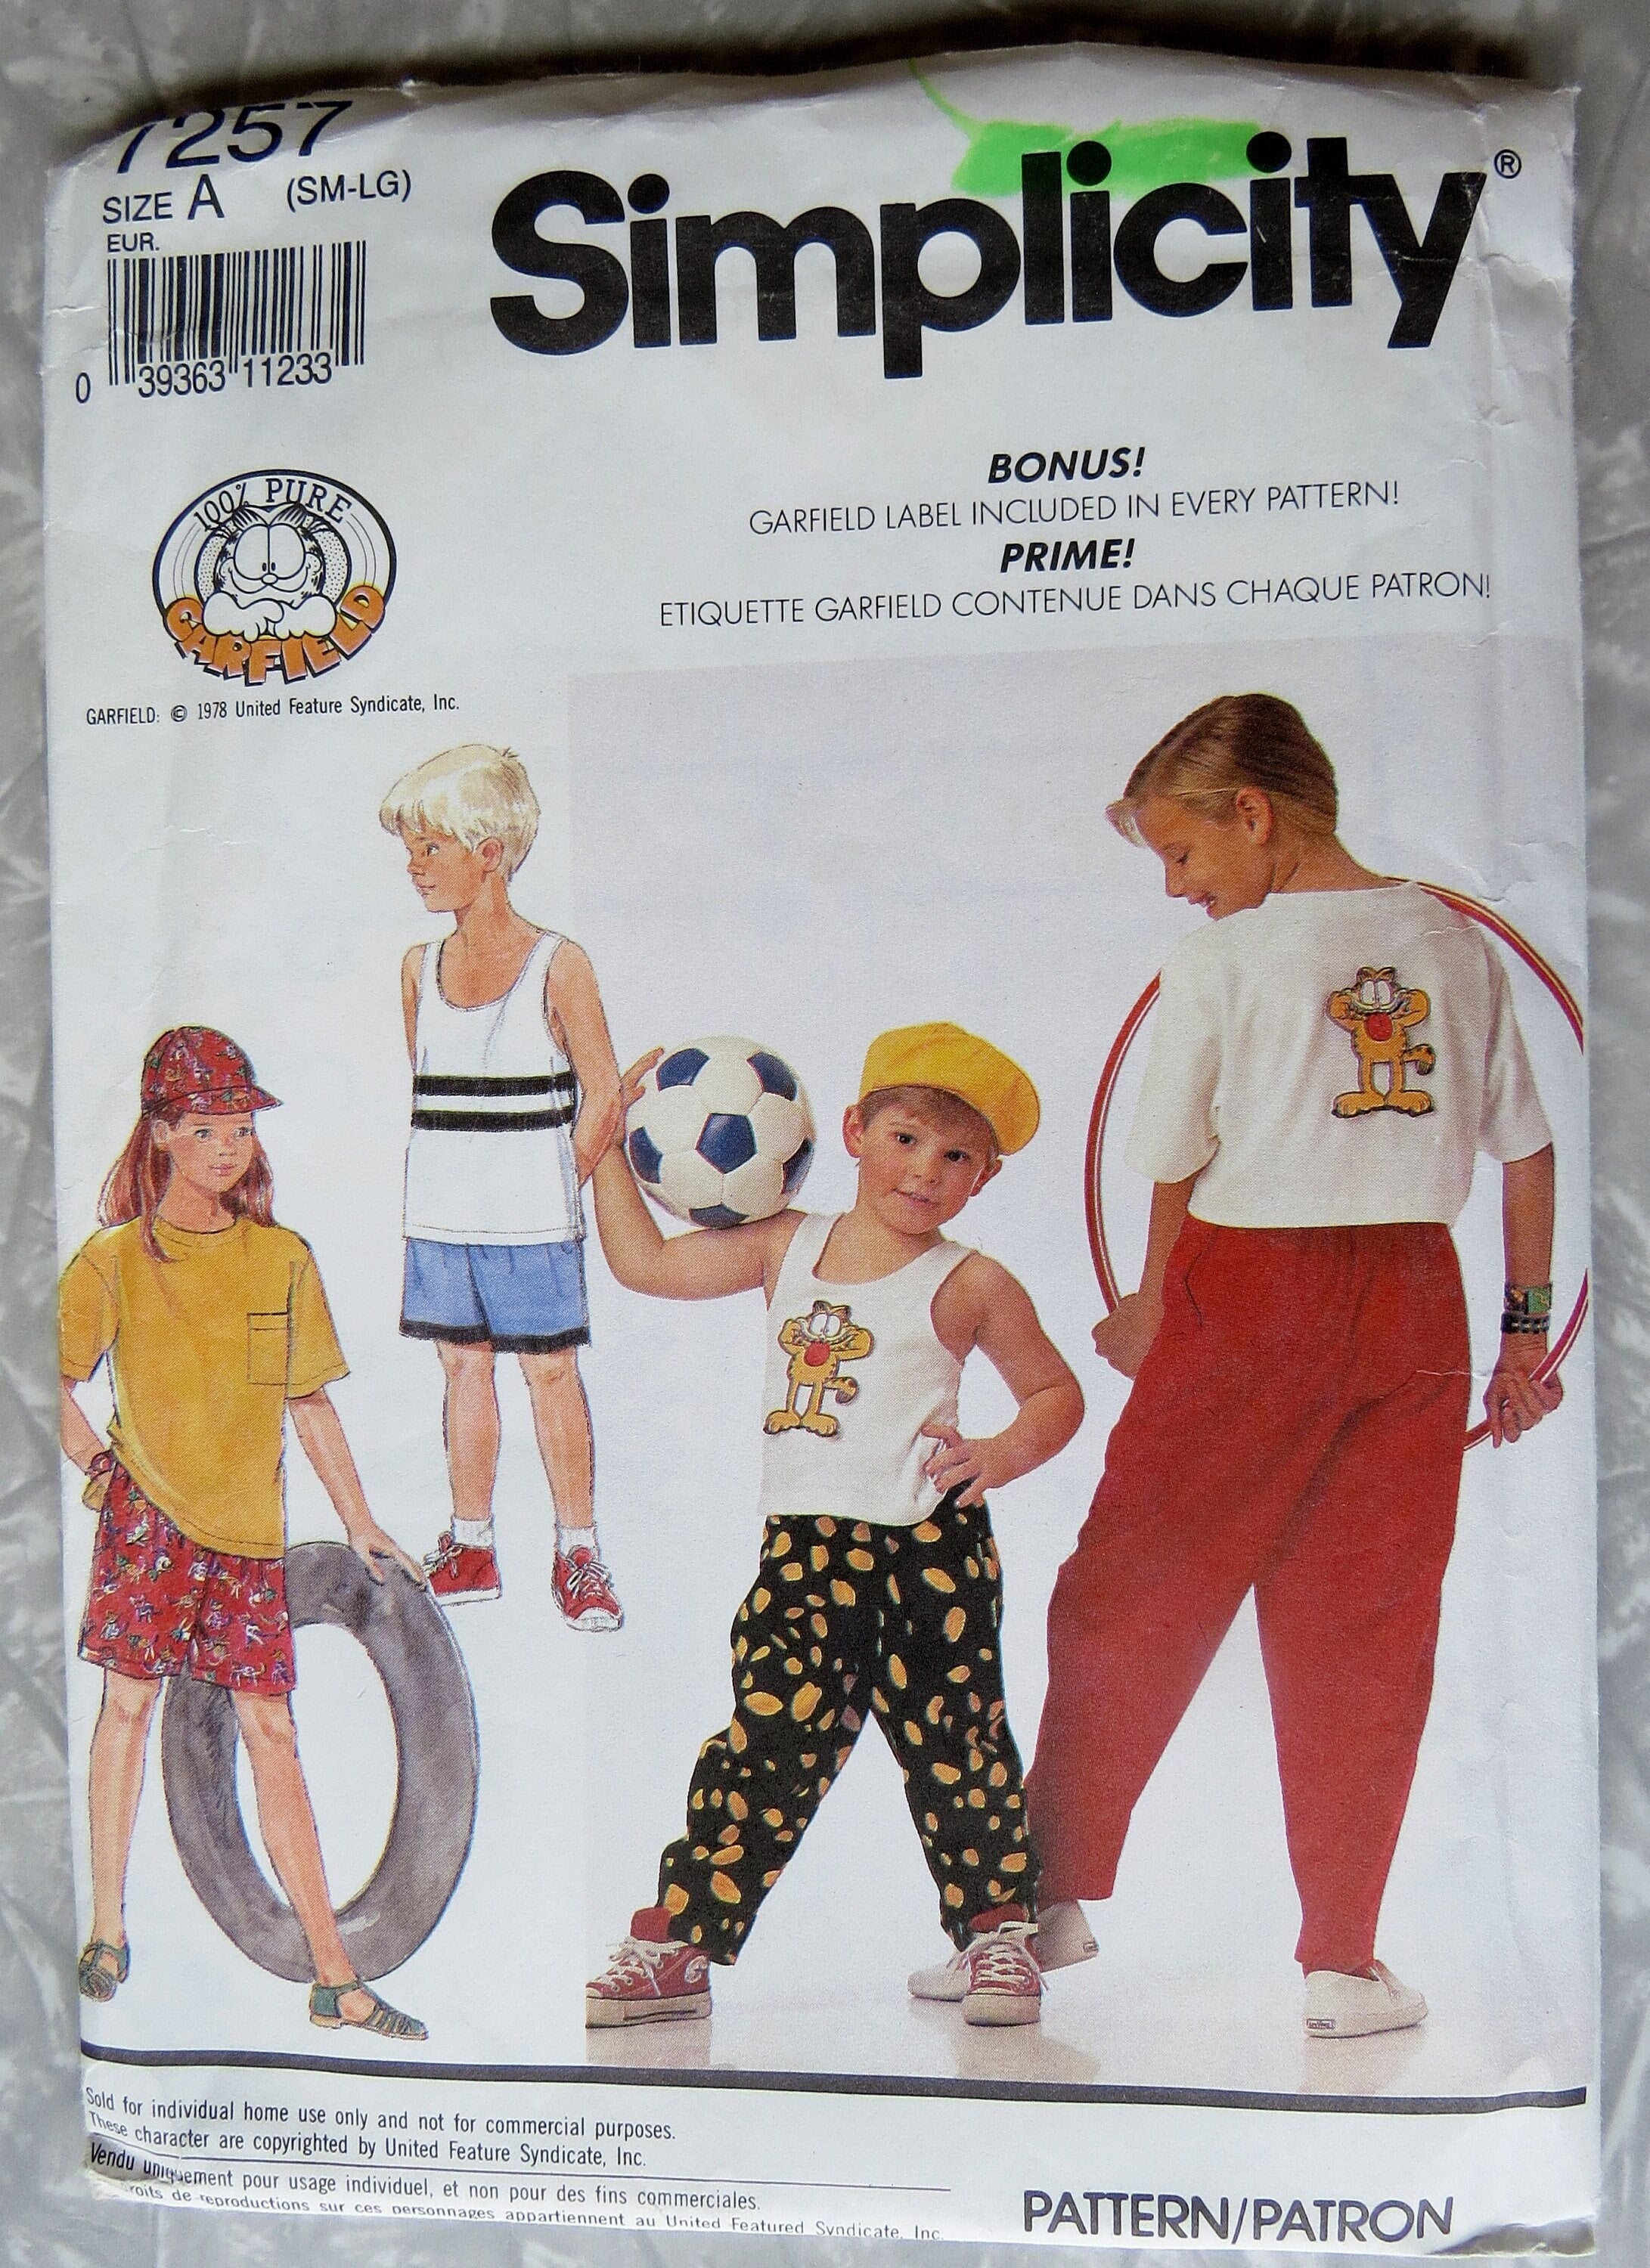 Simplicity 7257 Pull-on Pants Shorts Hat Knit Tops in 2 Lengths Boys Girls  Child Size A: S M L, Garfield Transfer UNCUT 1990s Sewing Pattern 